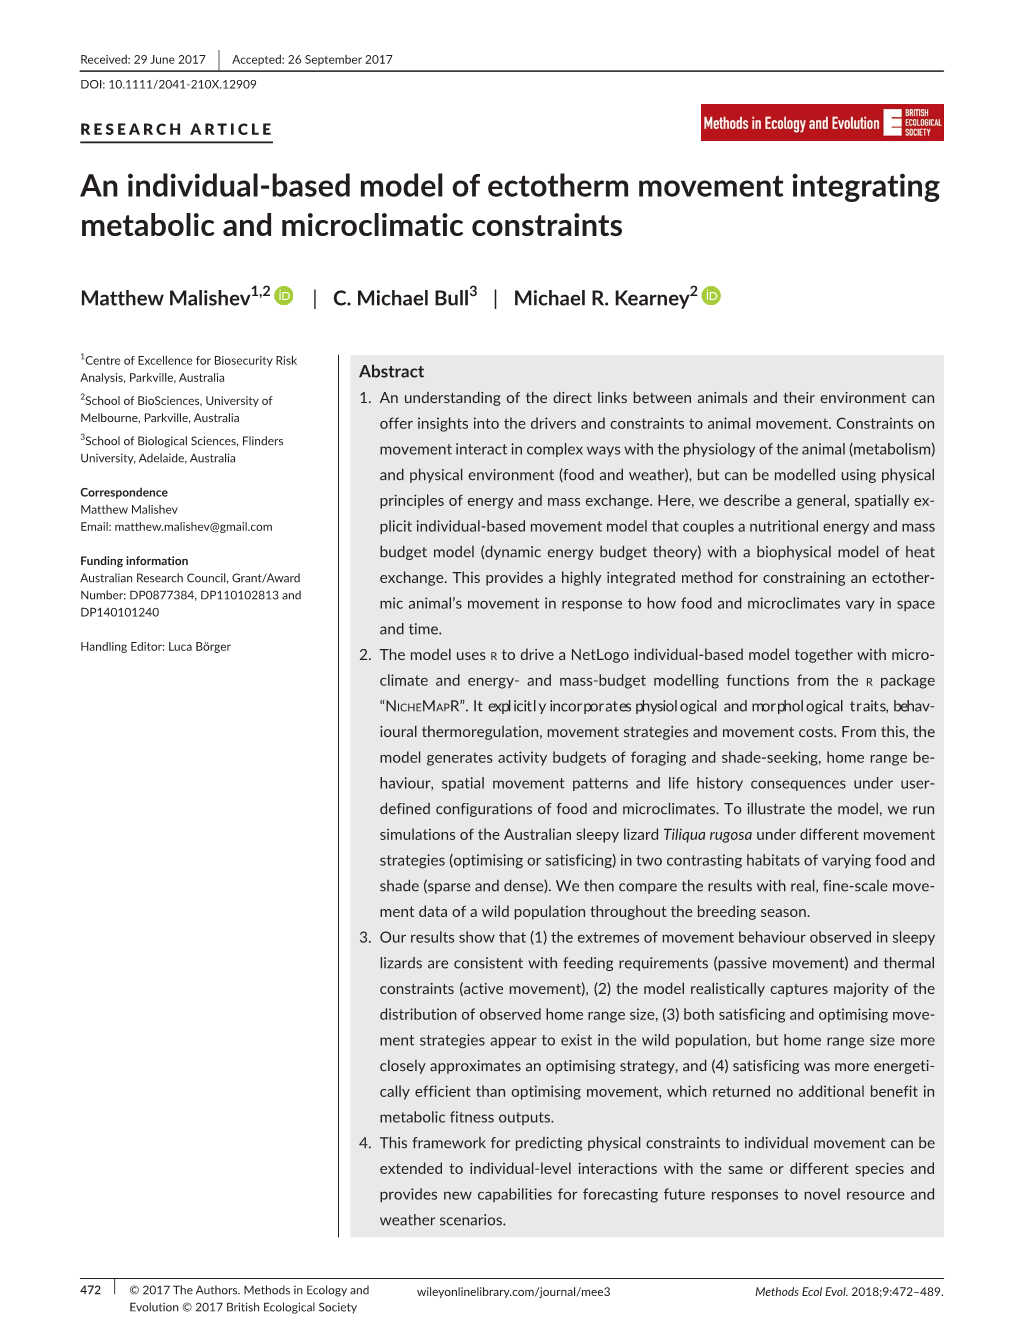 An Individual‐Based Model of Ectotherm Movement Integrating